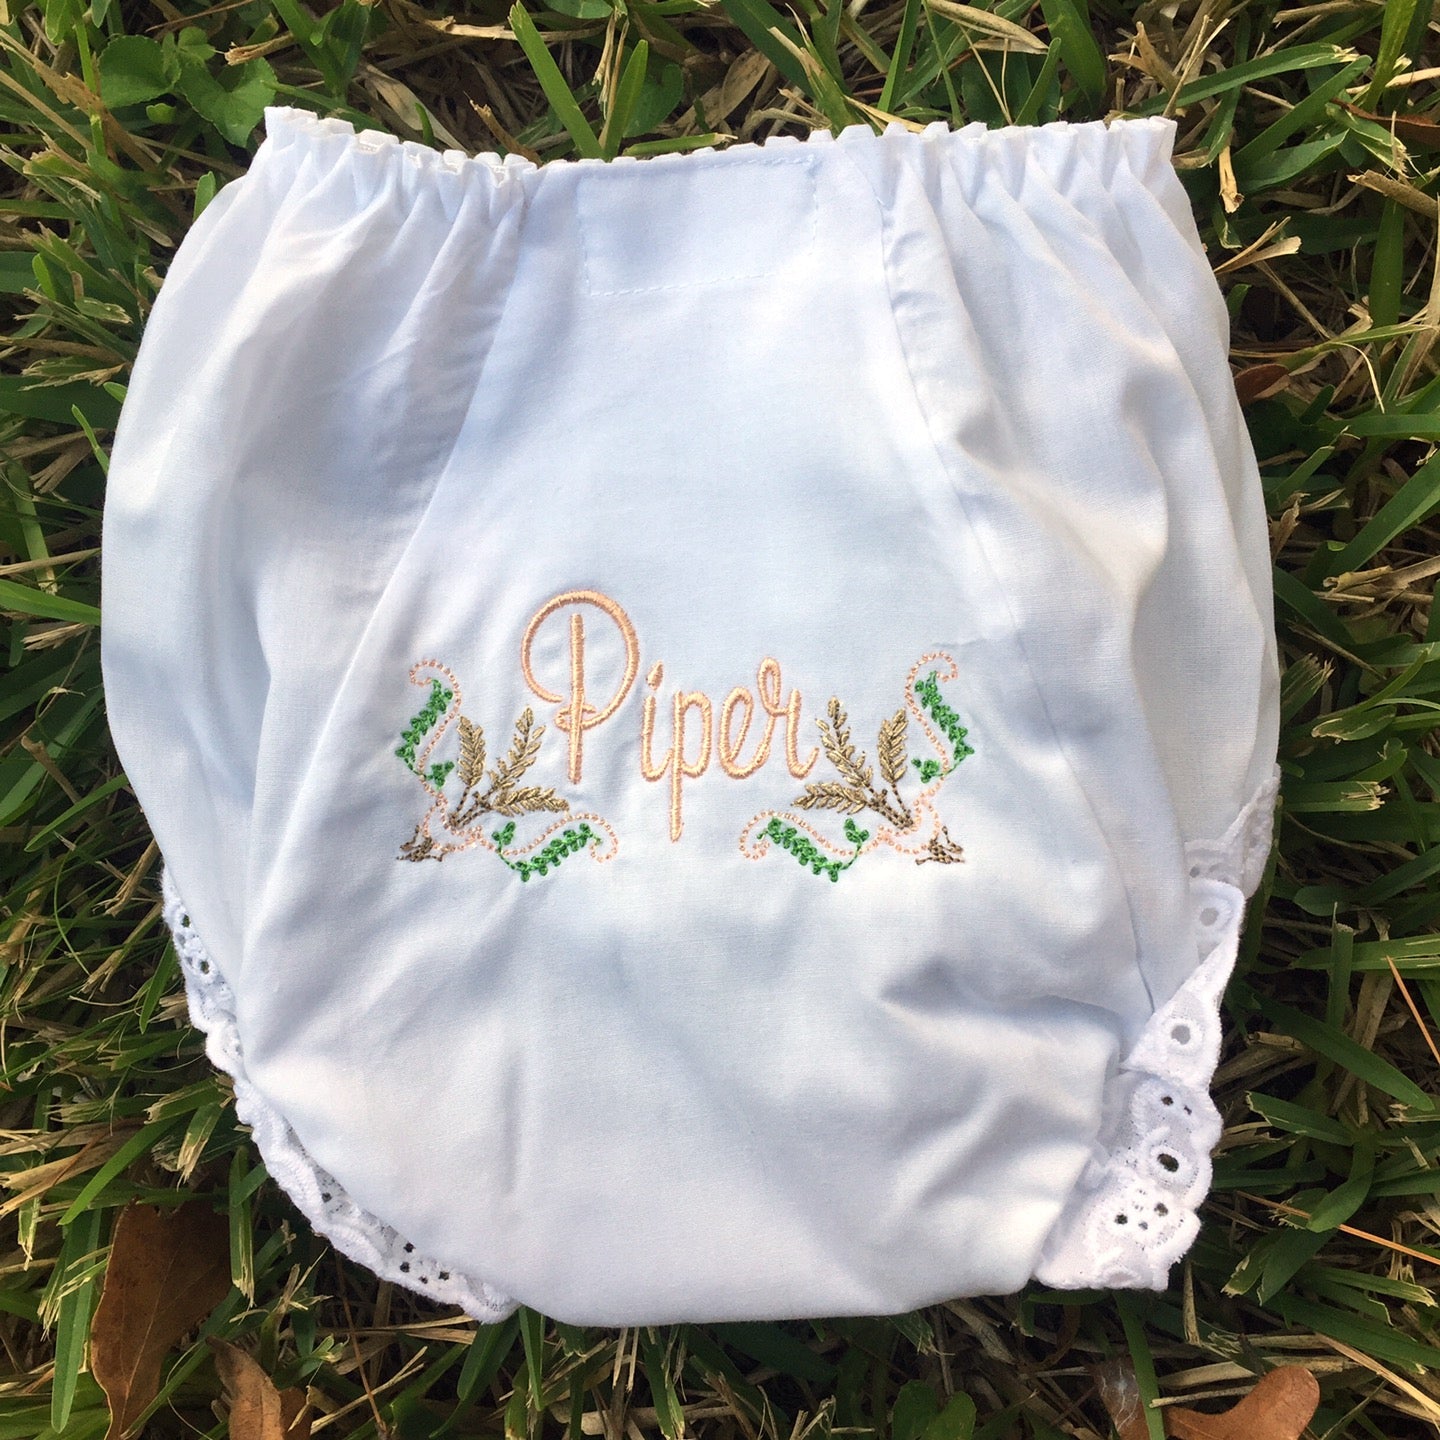 White Diaper Cover with Eyelet Ruffle Legs